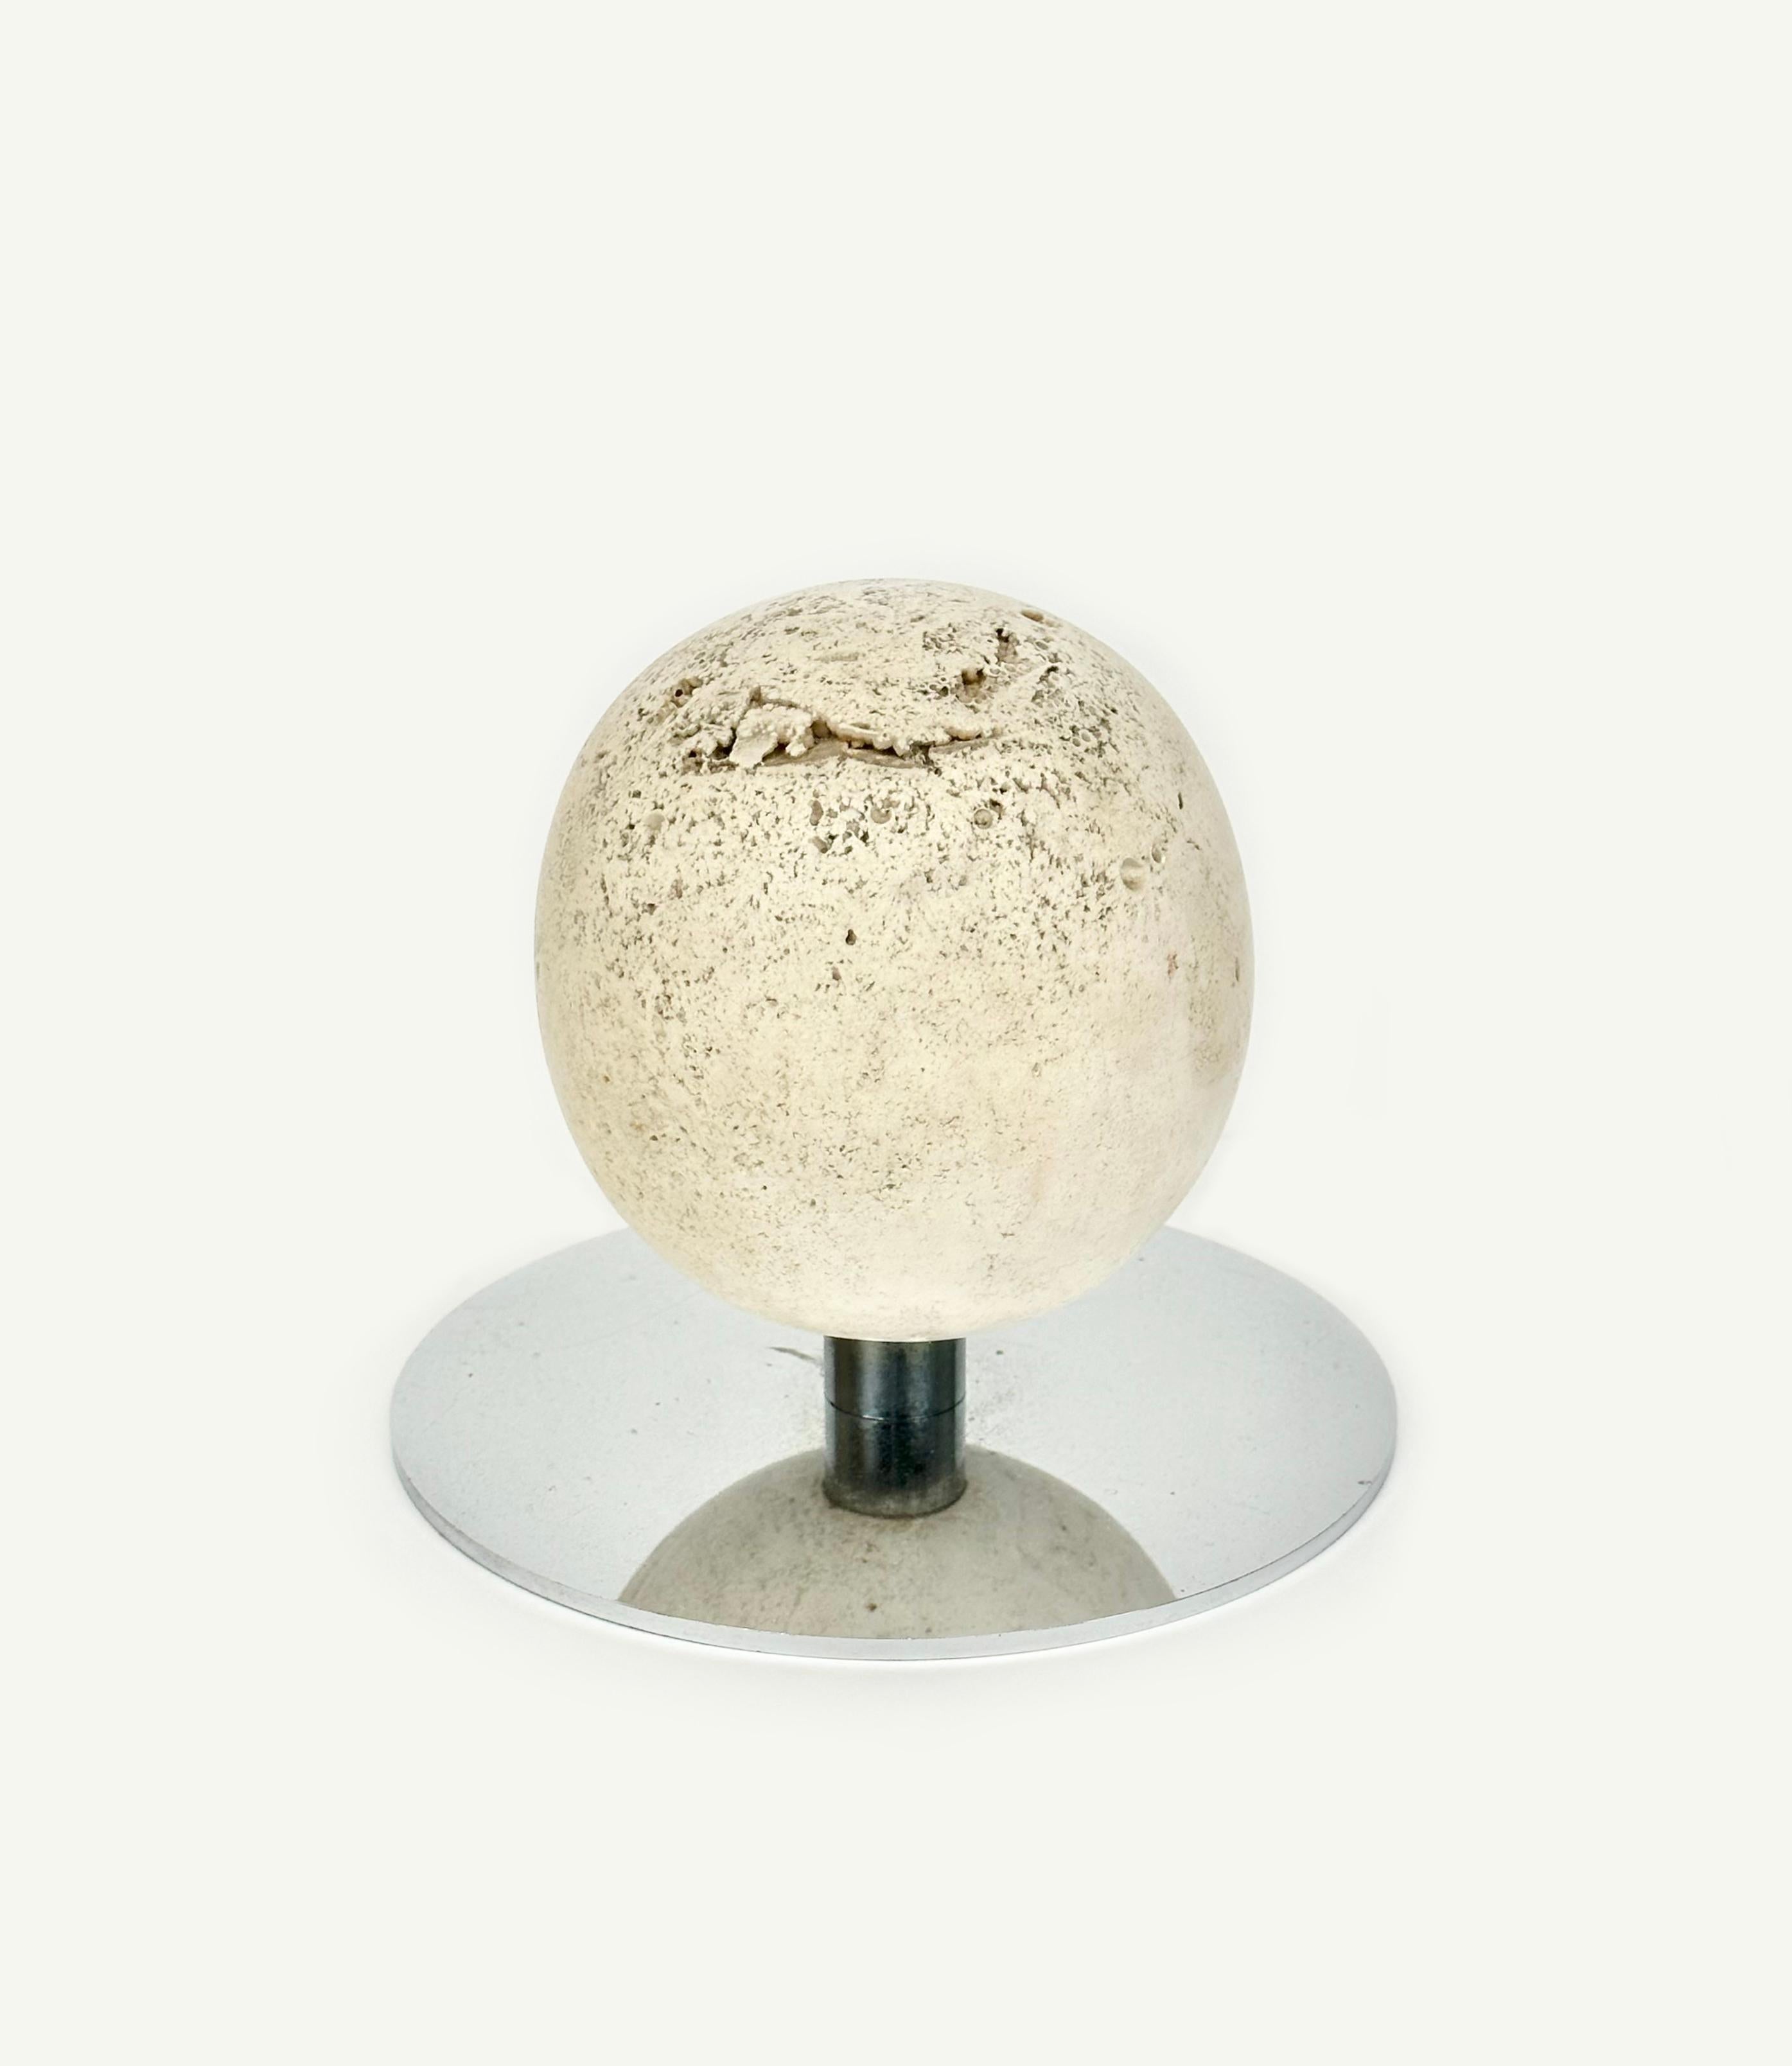 Mid-Century Modern Mid-Century Ball Sculpture Paperweight in Steel and Travertine, Italy, 1970s For Sale